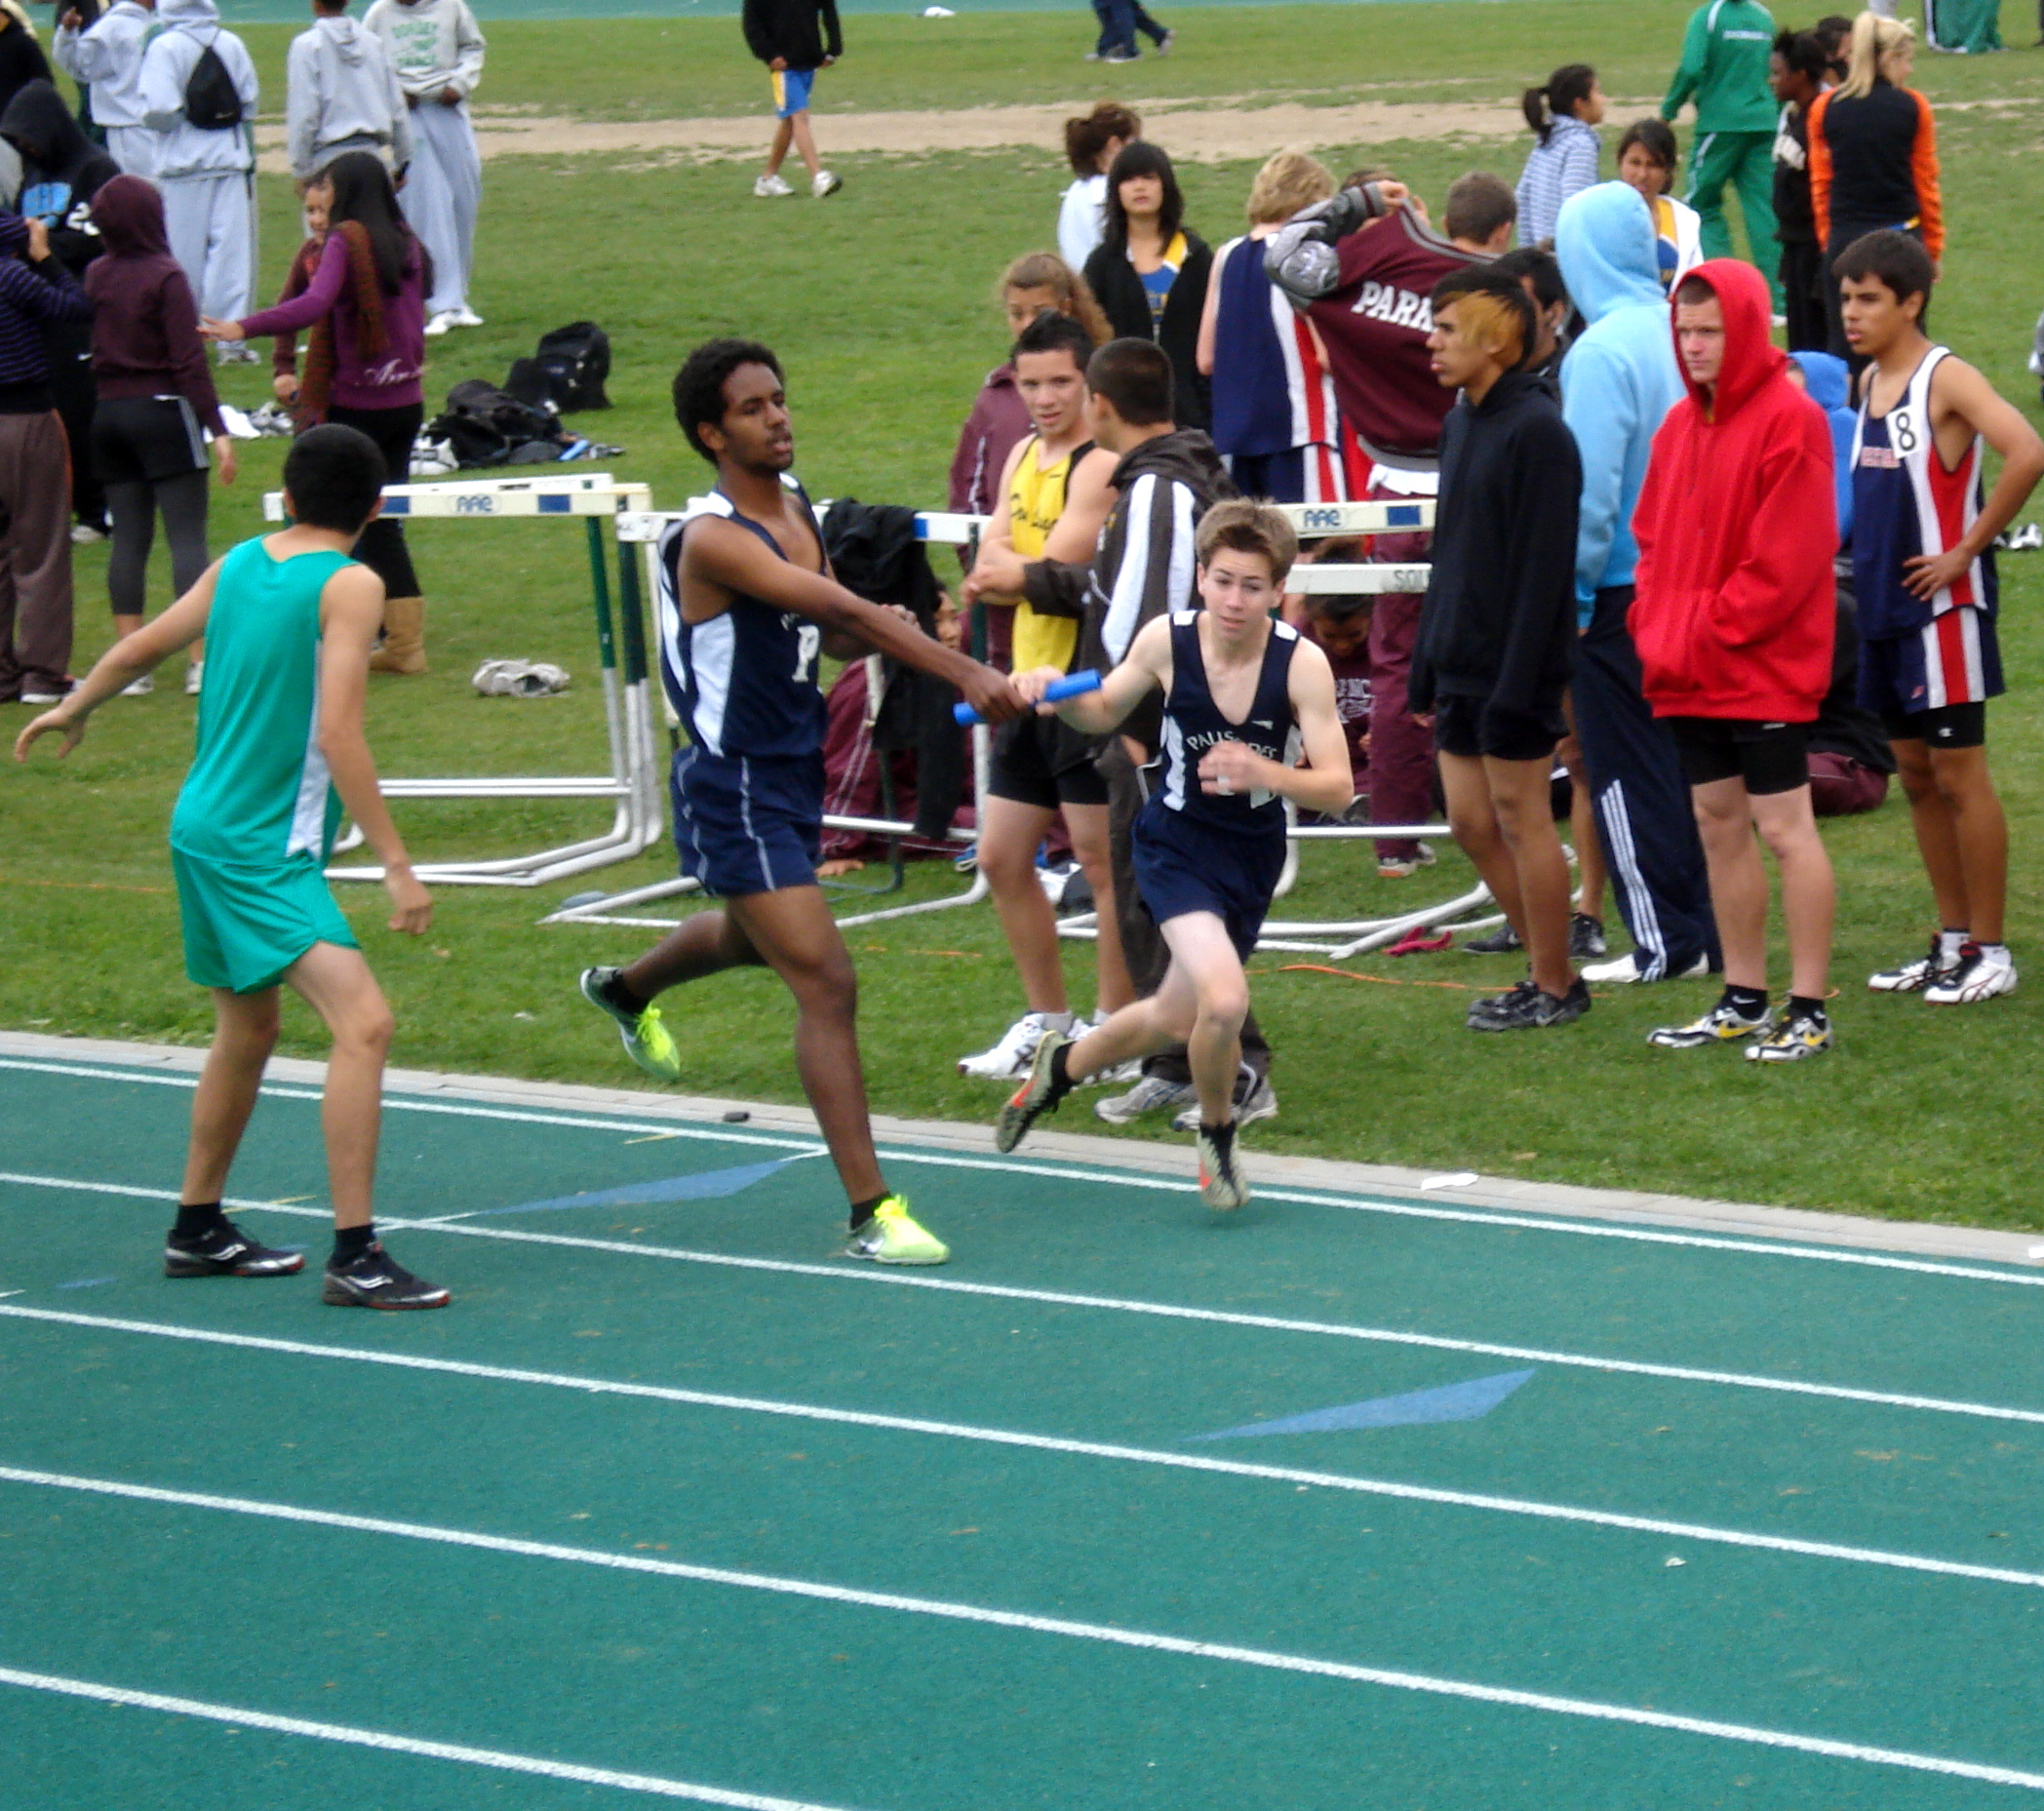 Sahar Micheal (left) hands off the baton to Palisades High teammate Grant Stromberg during the frosh/soph 4 x 800 relay. Photo courtesy of Carl Stromberg